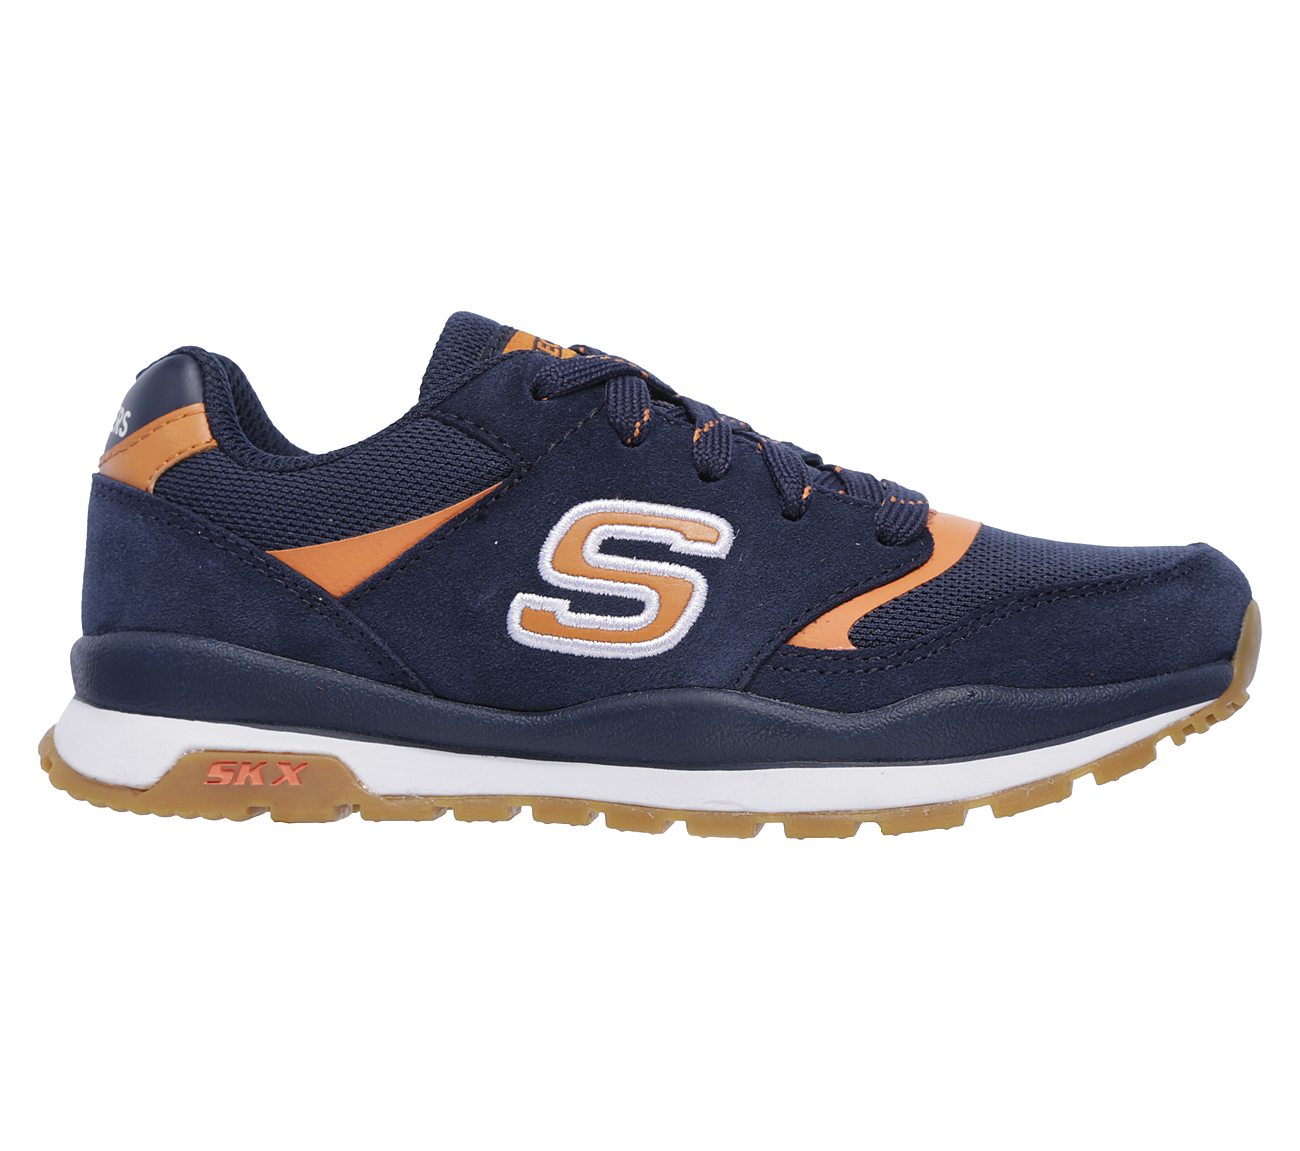 Buy SKECHERS Throwbax - Steady Pace Originals Shoes